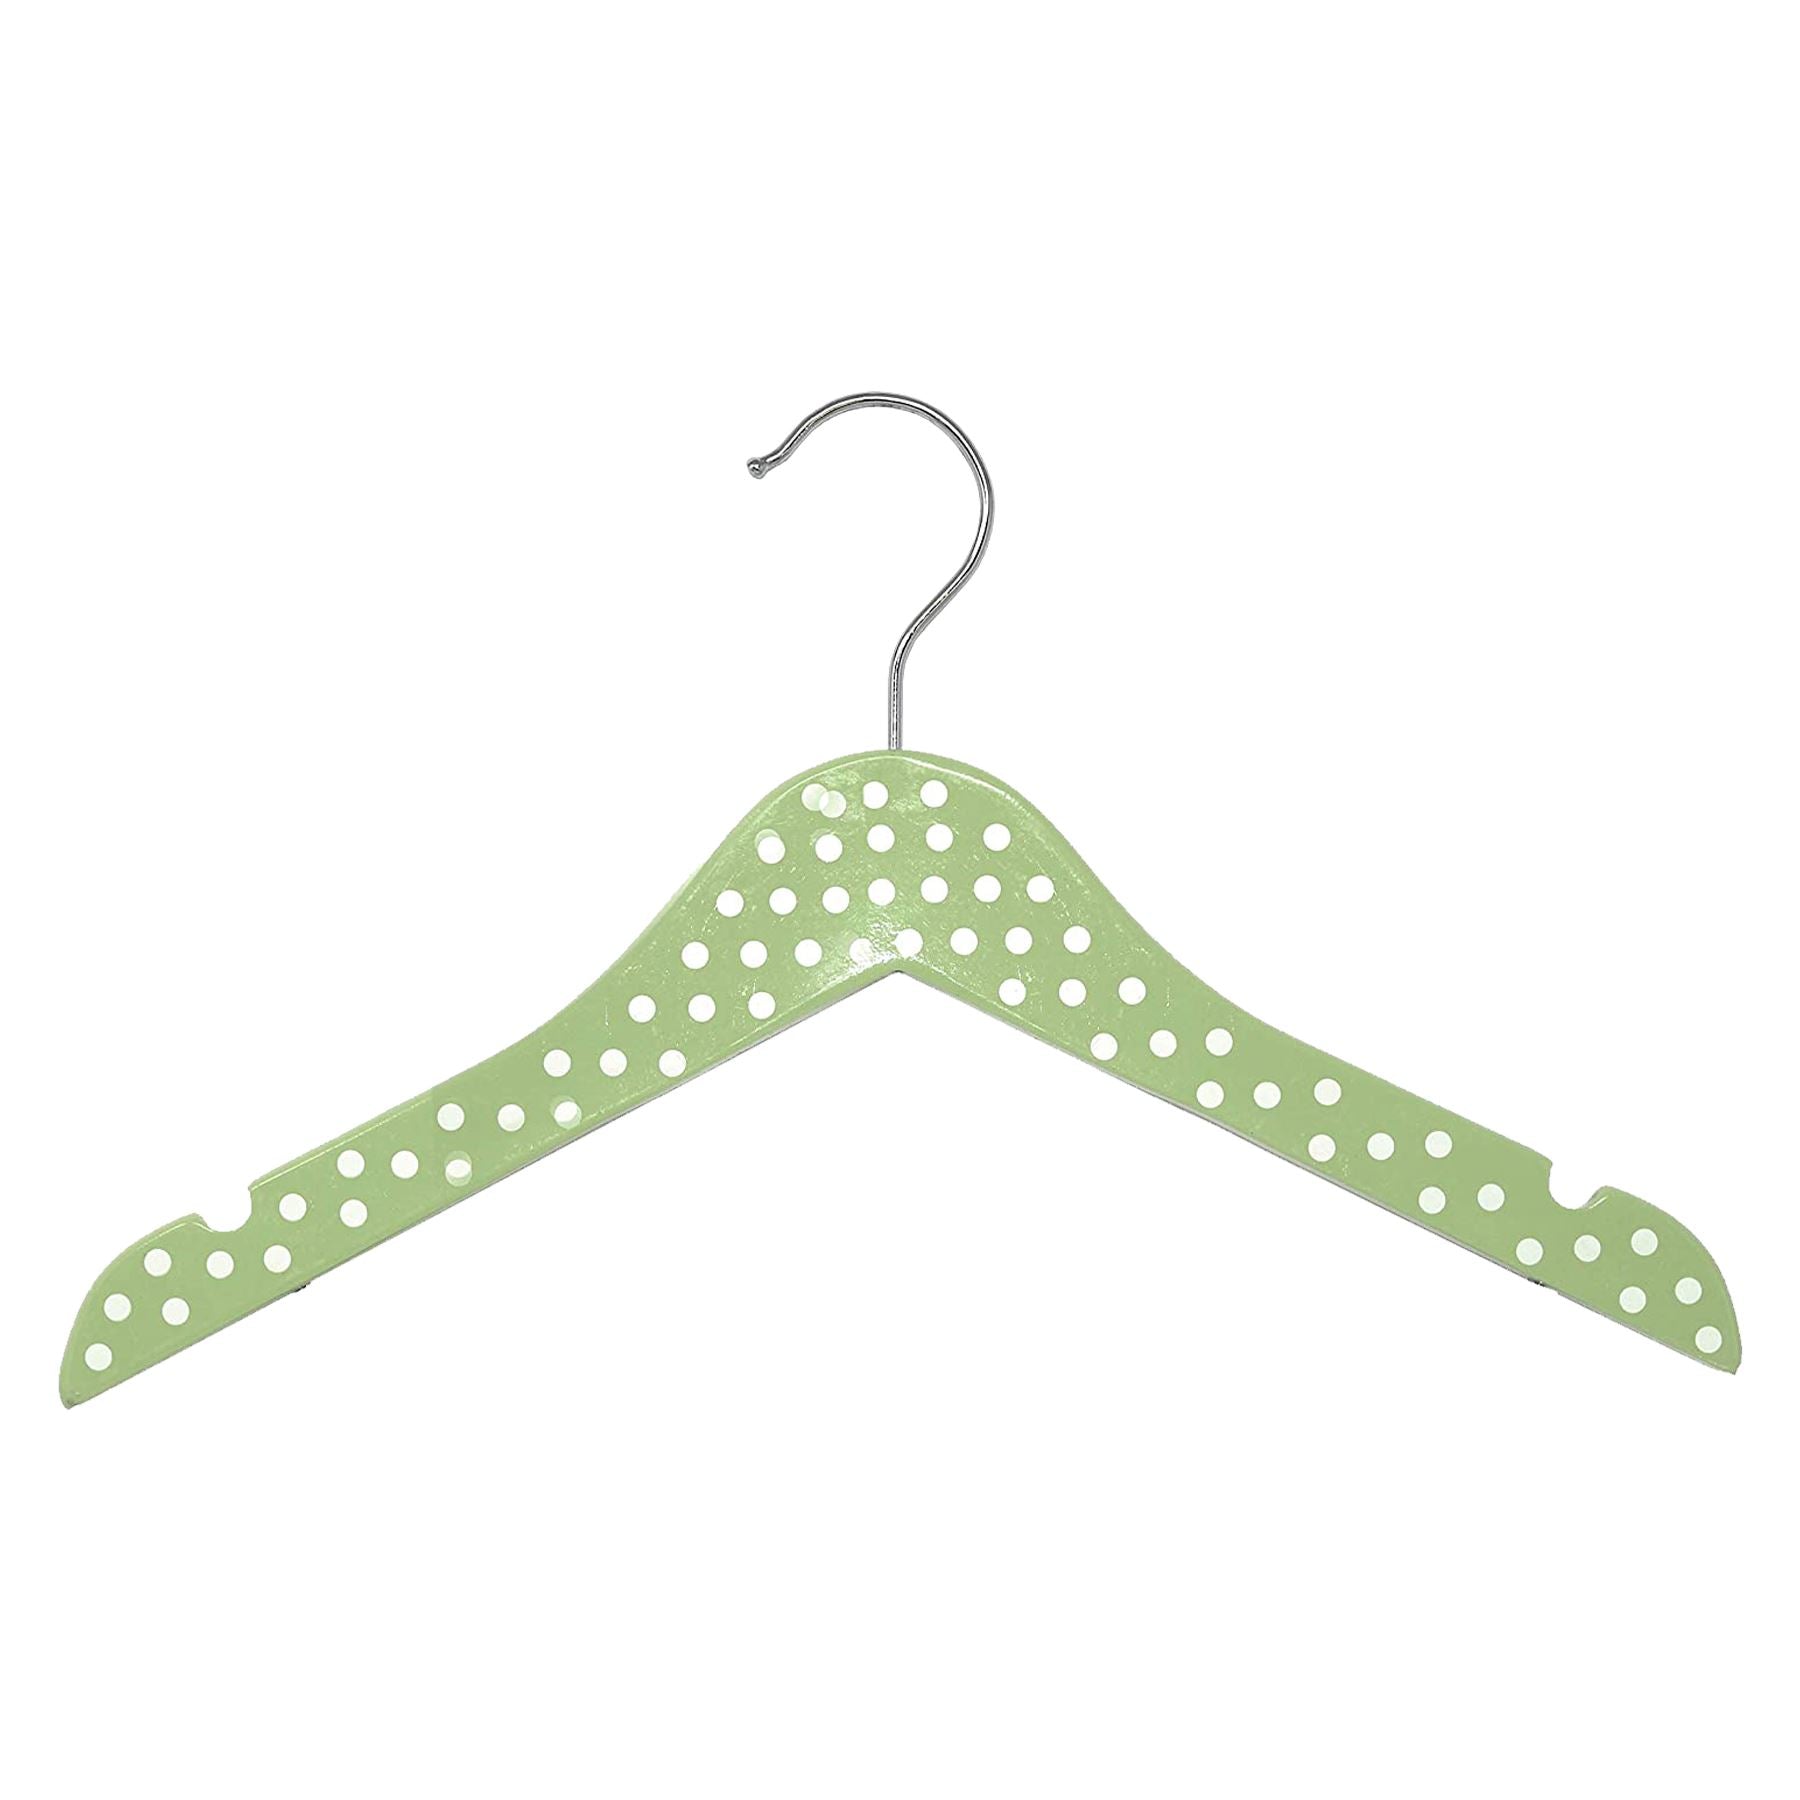 Children's Wooden Clothes Hangers Hangers Craftworks NW Green 1-Side None